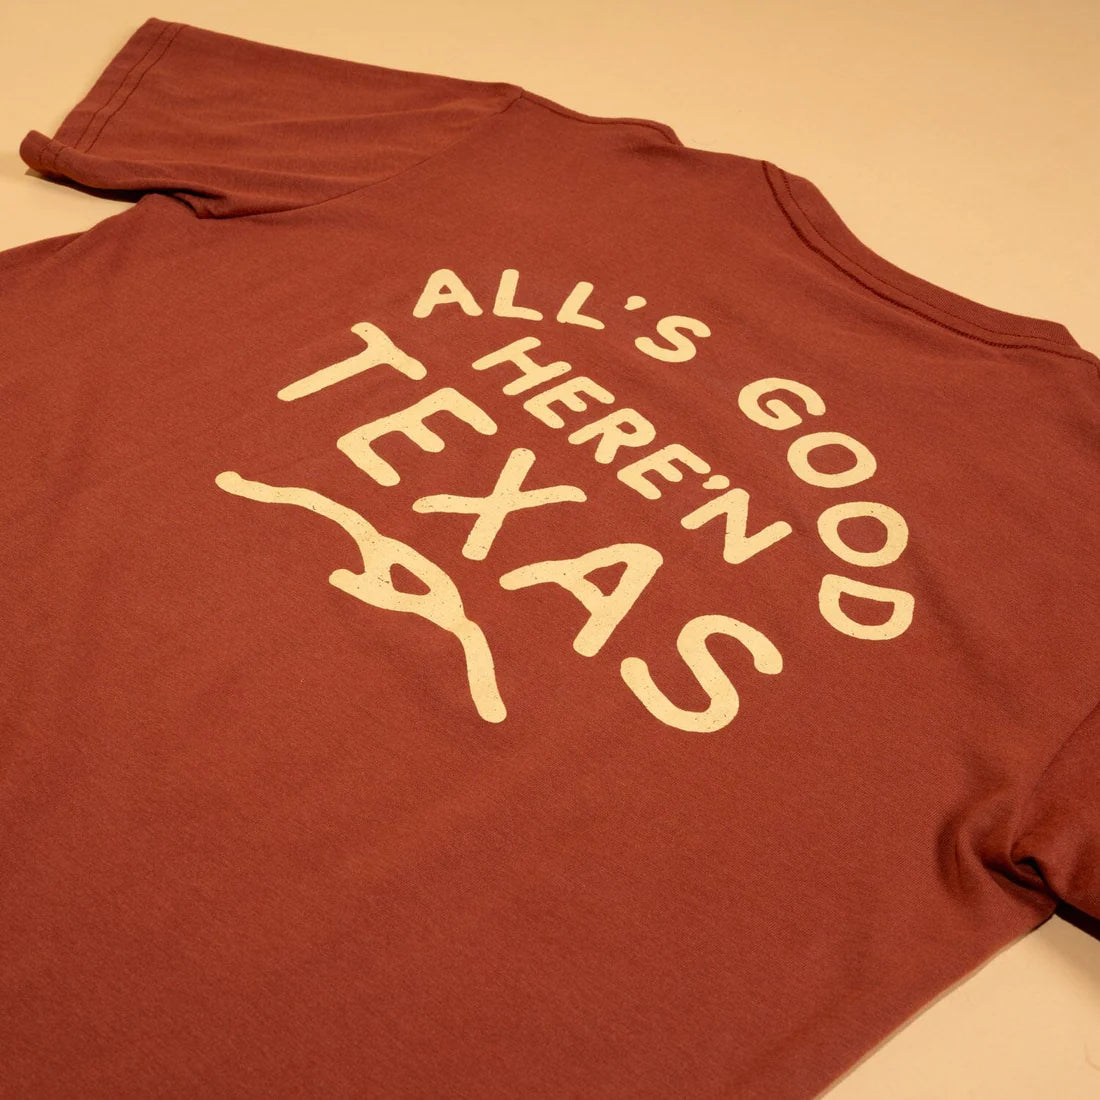 All's Good Here'n Texas - KC Outfitter